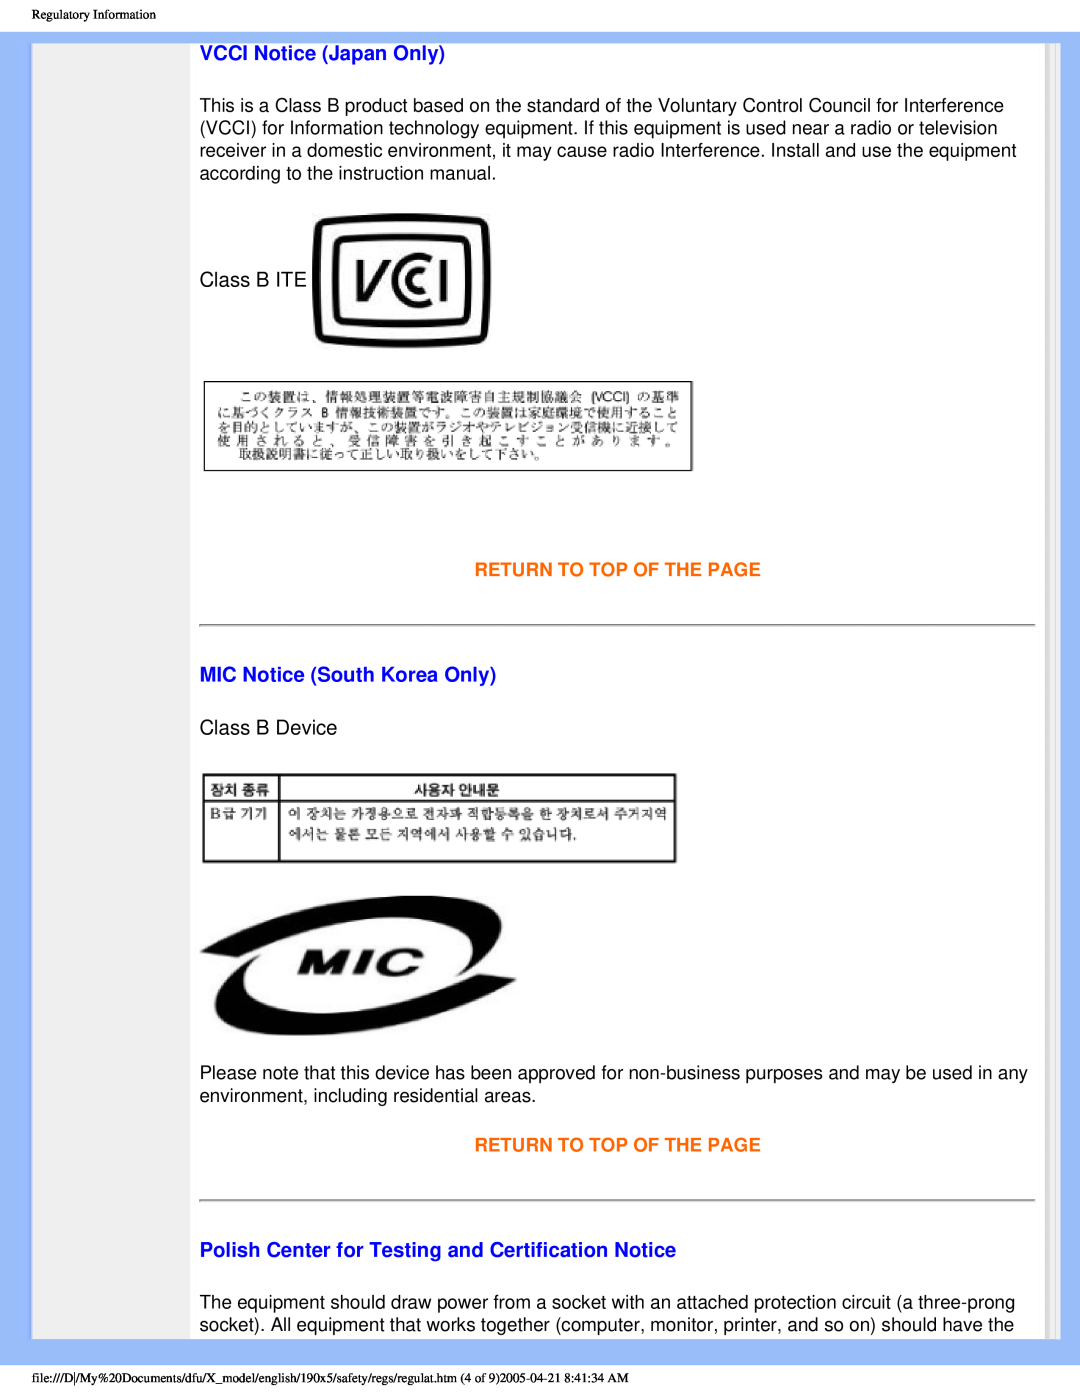 Philips 190X5 VCCI Notice Japan Only, MIC Notice South Korea Only, Polish Center for Testing and Certification Notice 